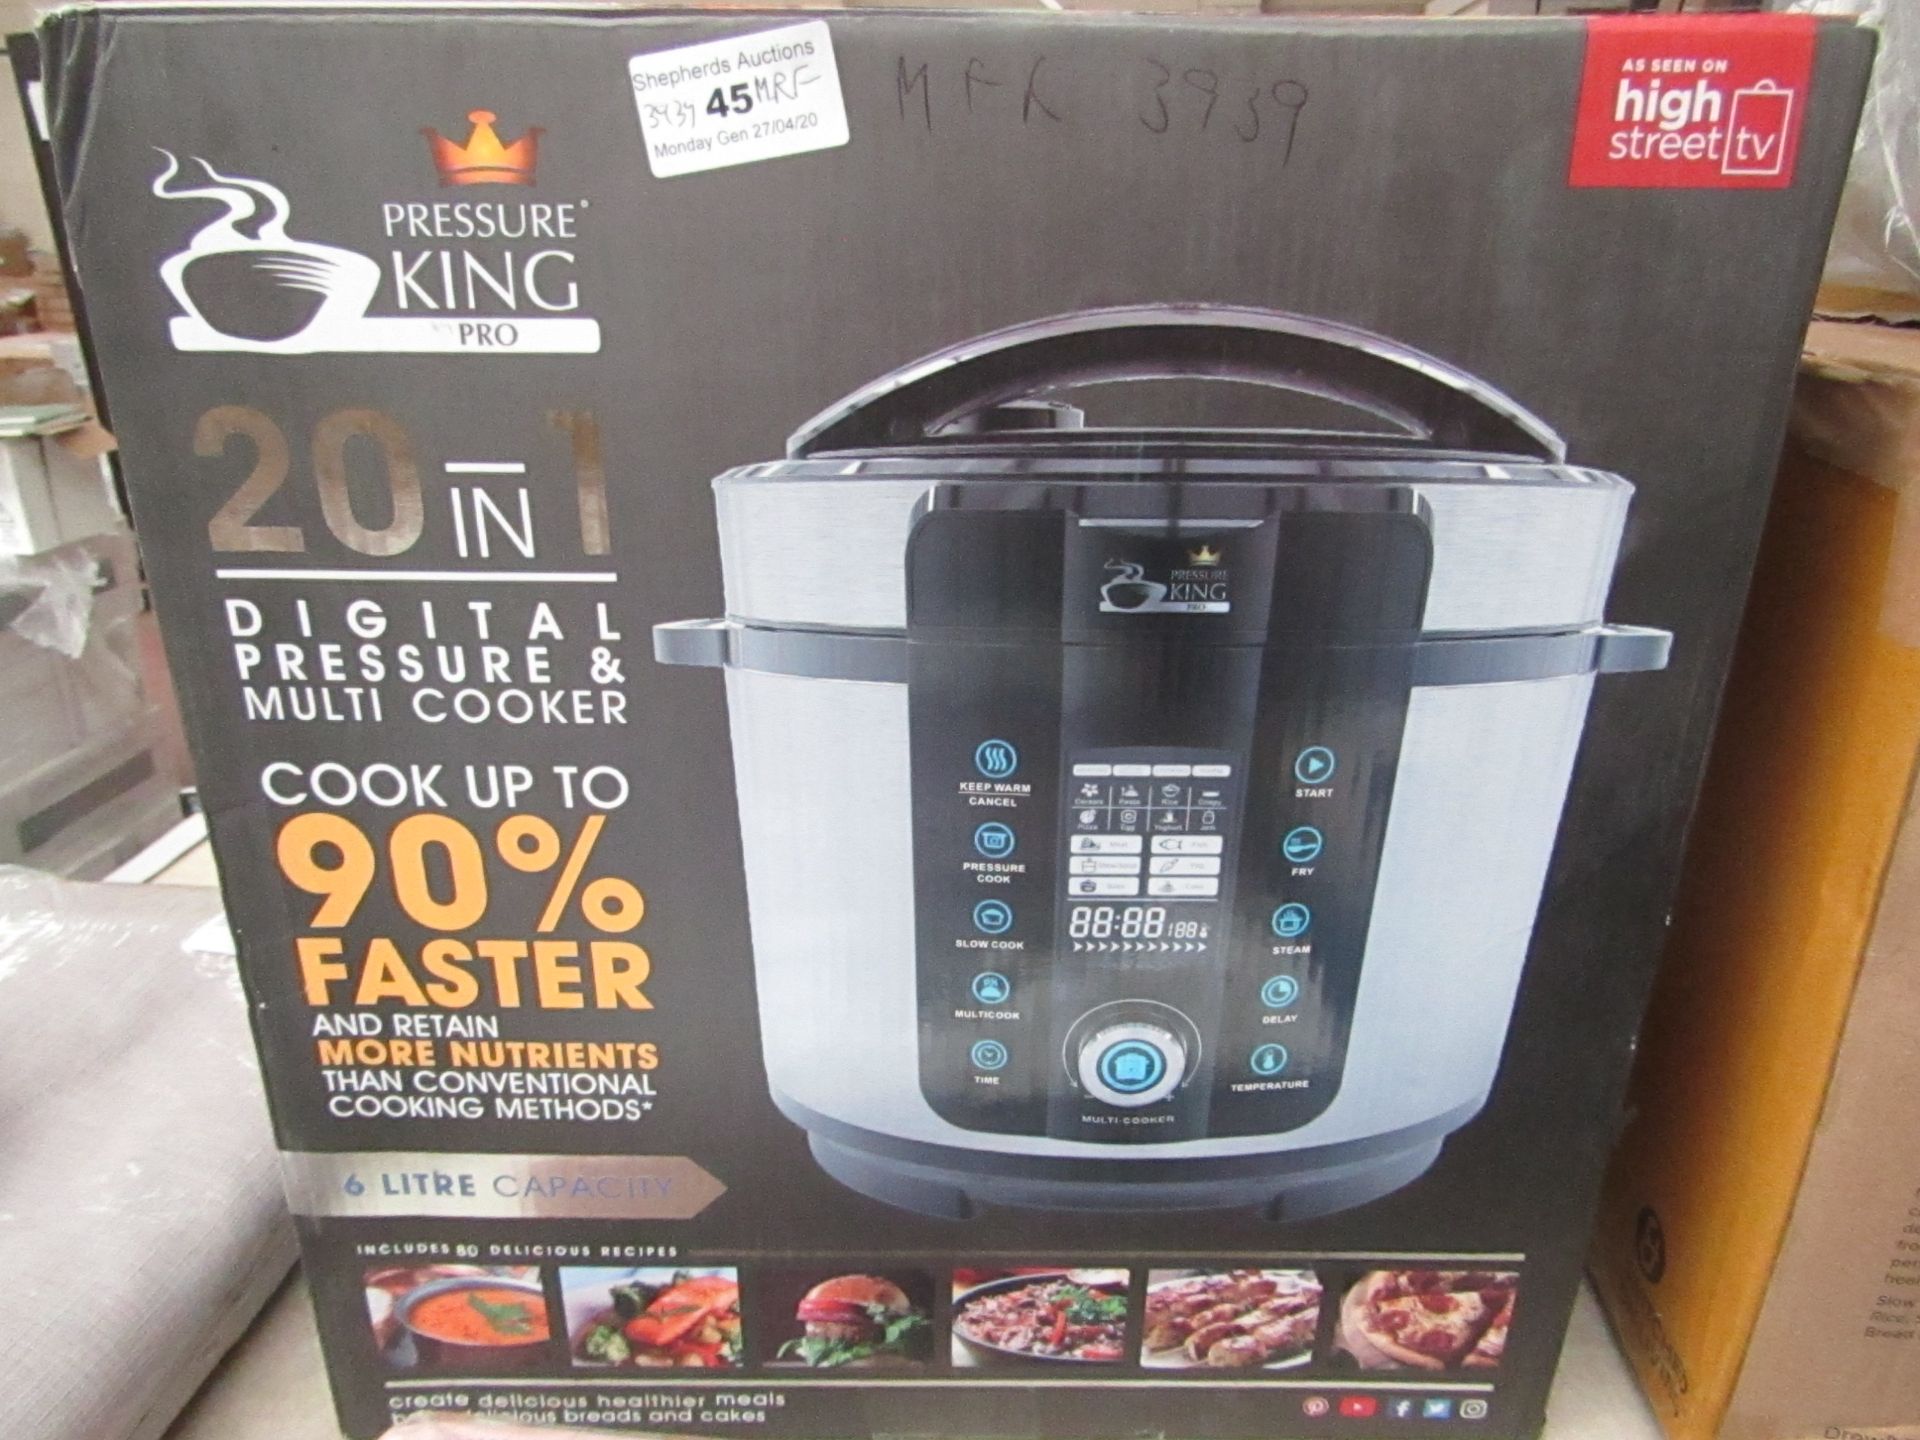 | 1X | PRESSURE KING PRO 20 IN 1 DIGITAL PRESSURE AND MULTI COOKER | REFURBISHED AND BOXED | NO